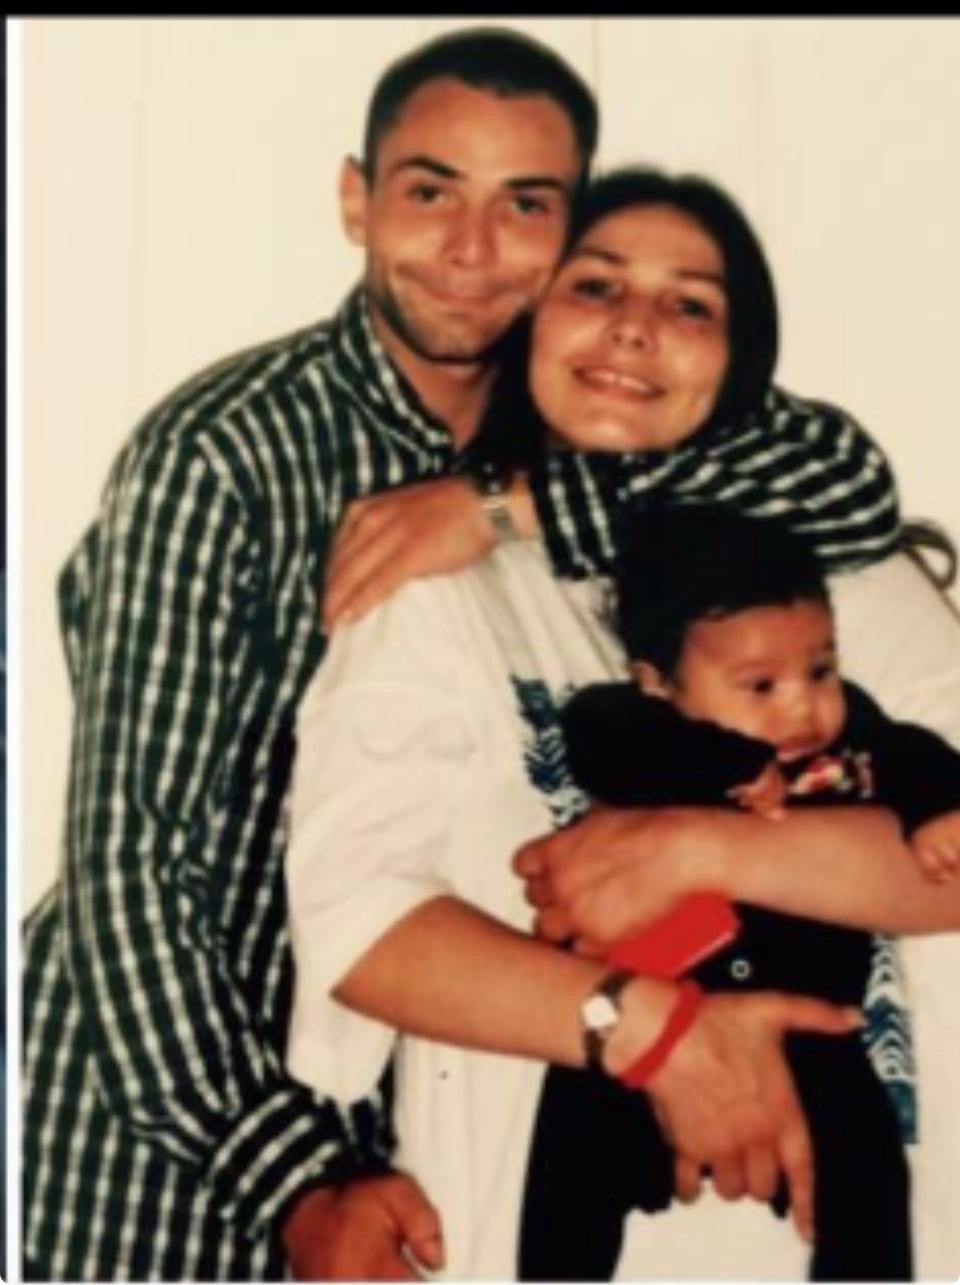 Ali, now 50, with his mother Jacqueline and his younger brother Hamza